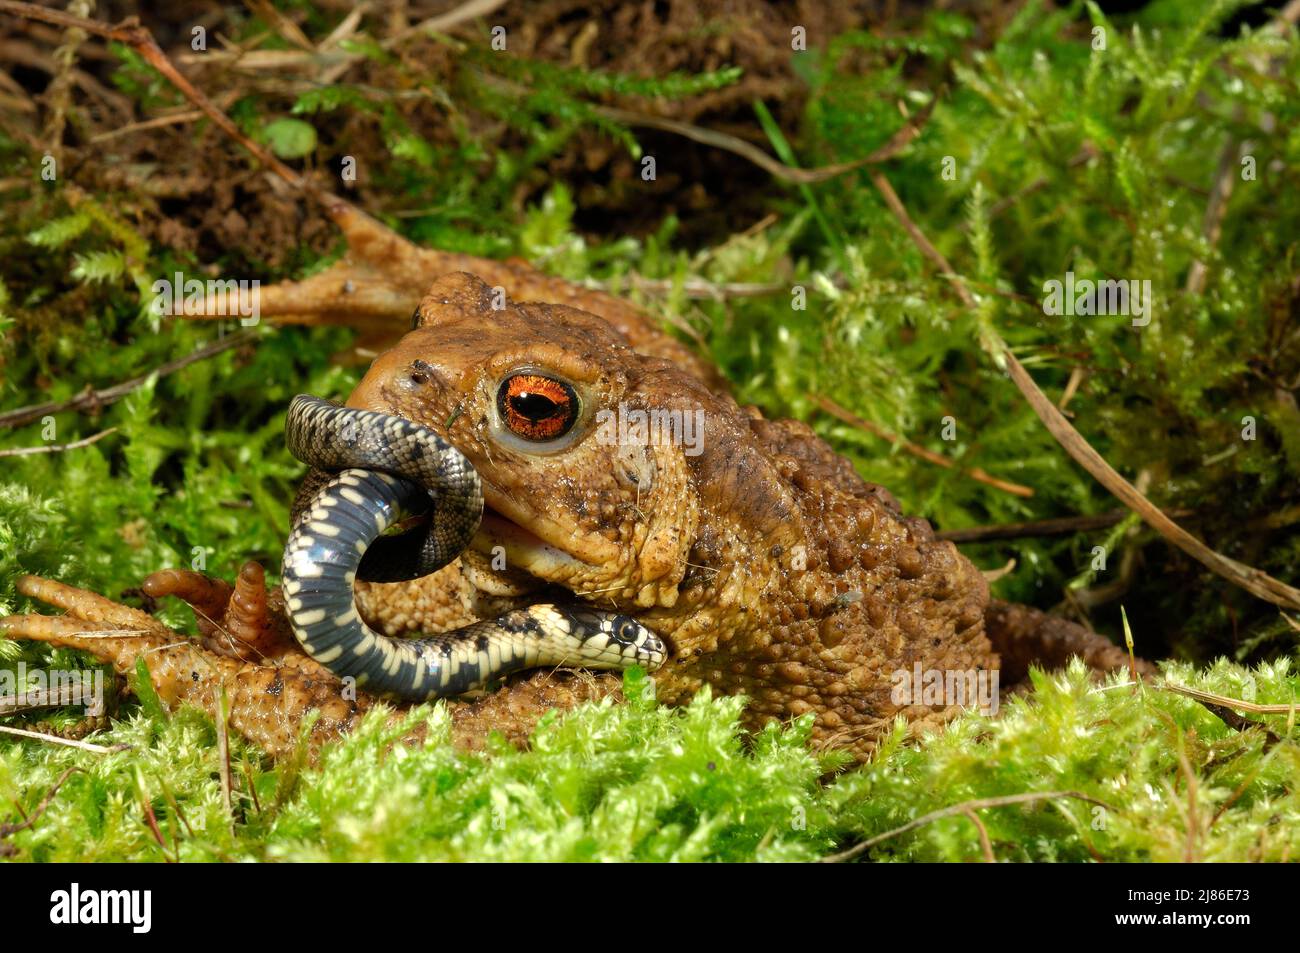 Common toad eating a young grass snake France Stock Photo